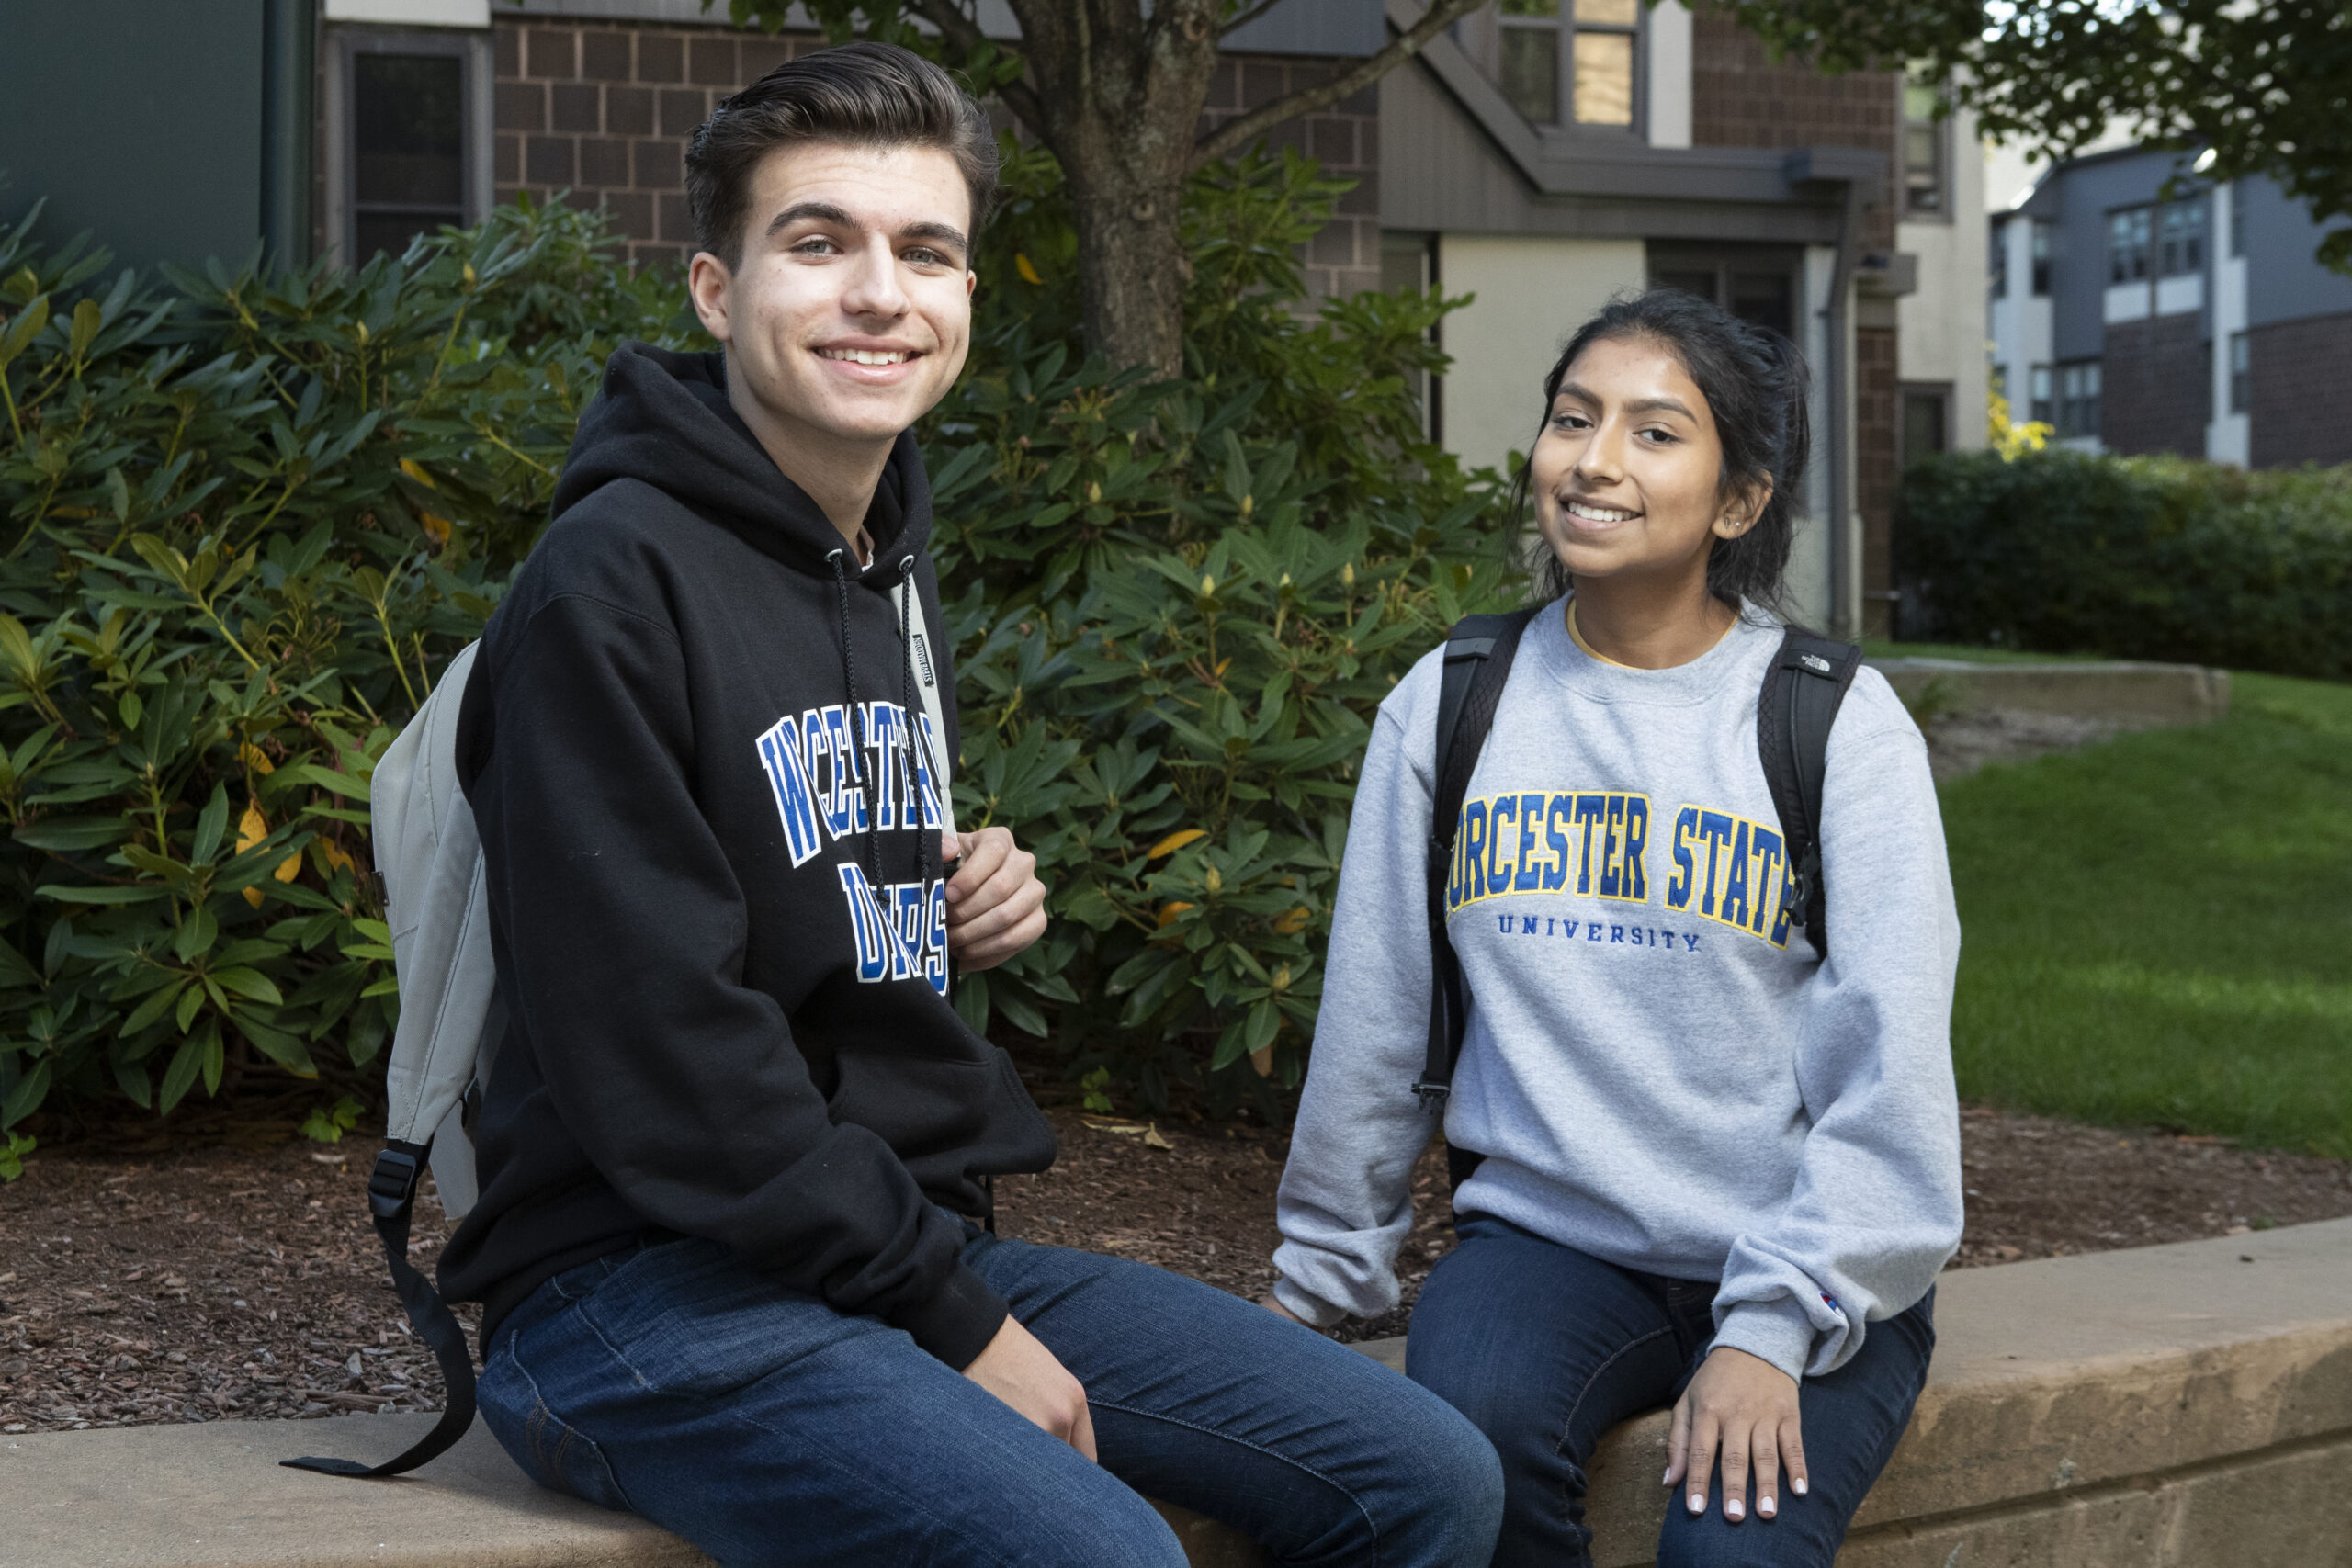 Two Worcester State University students smiling on campus